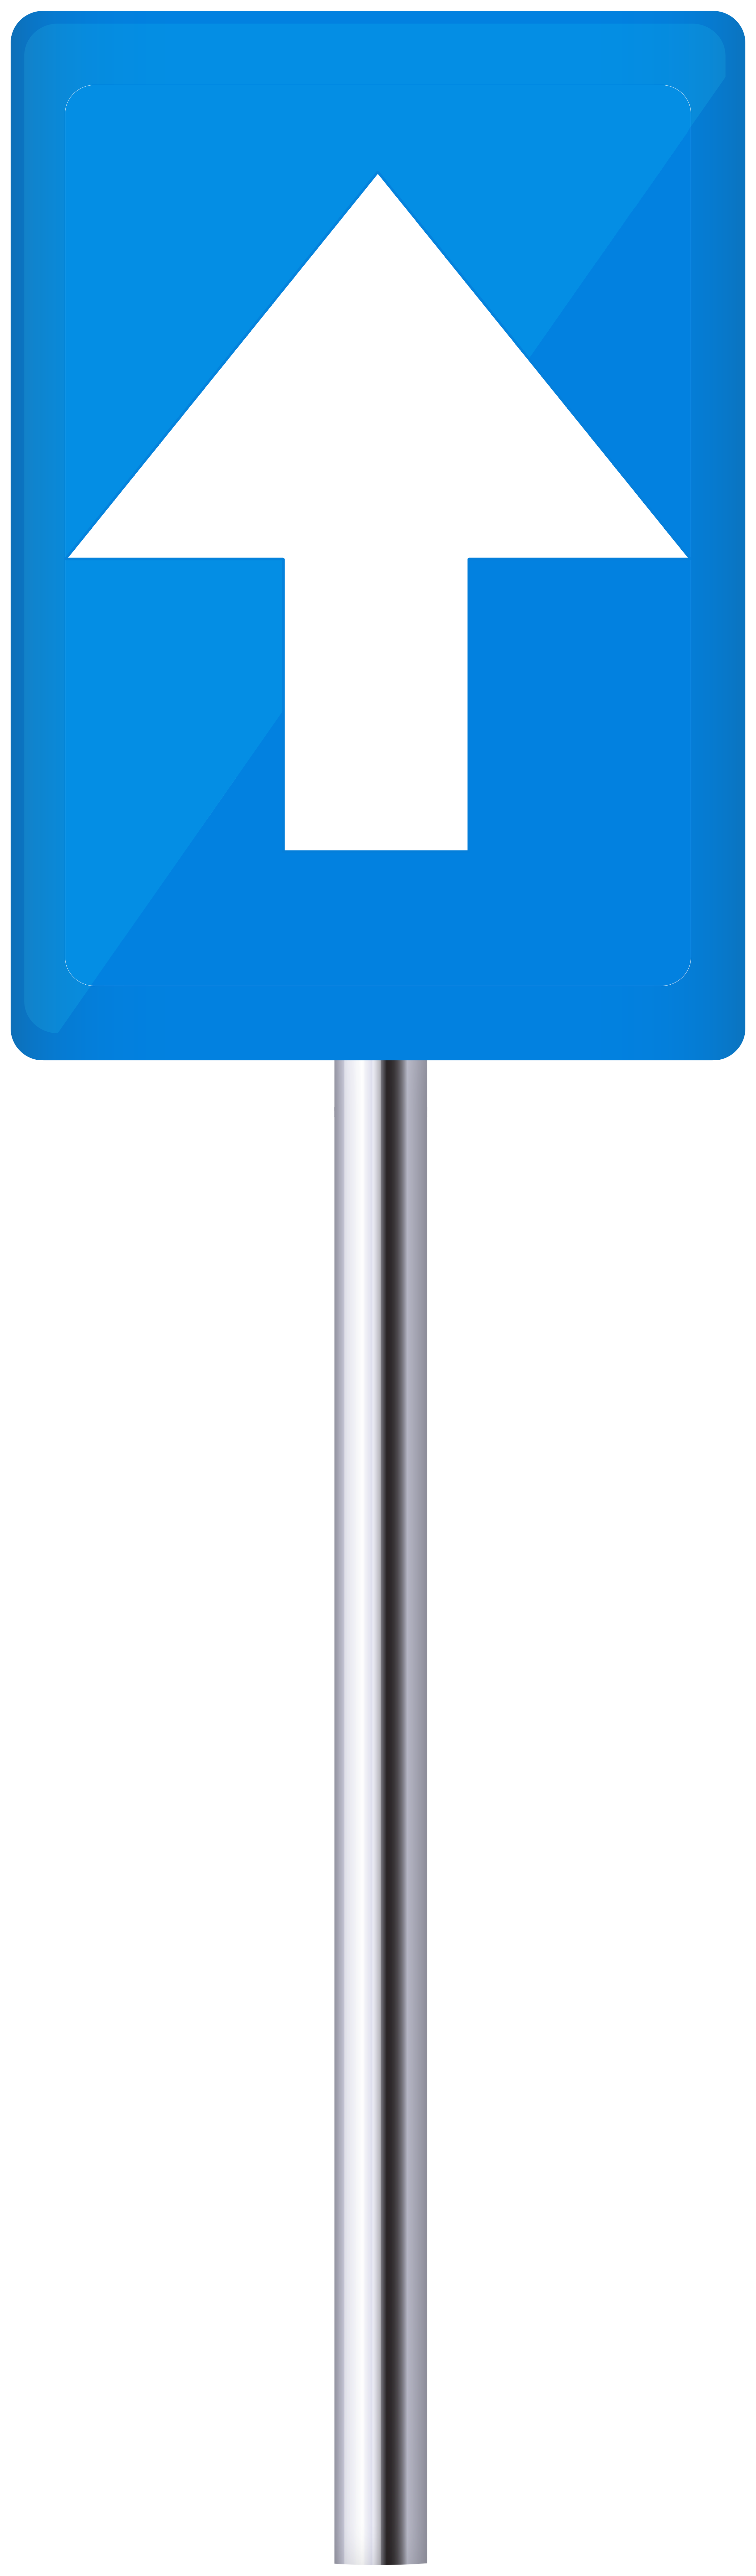 directional road sign clip art